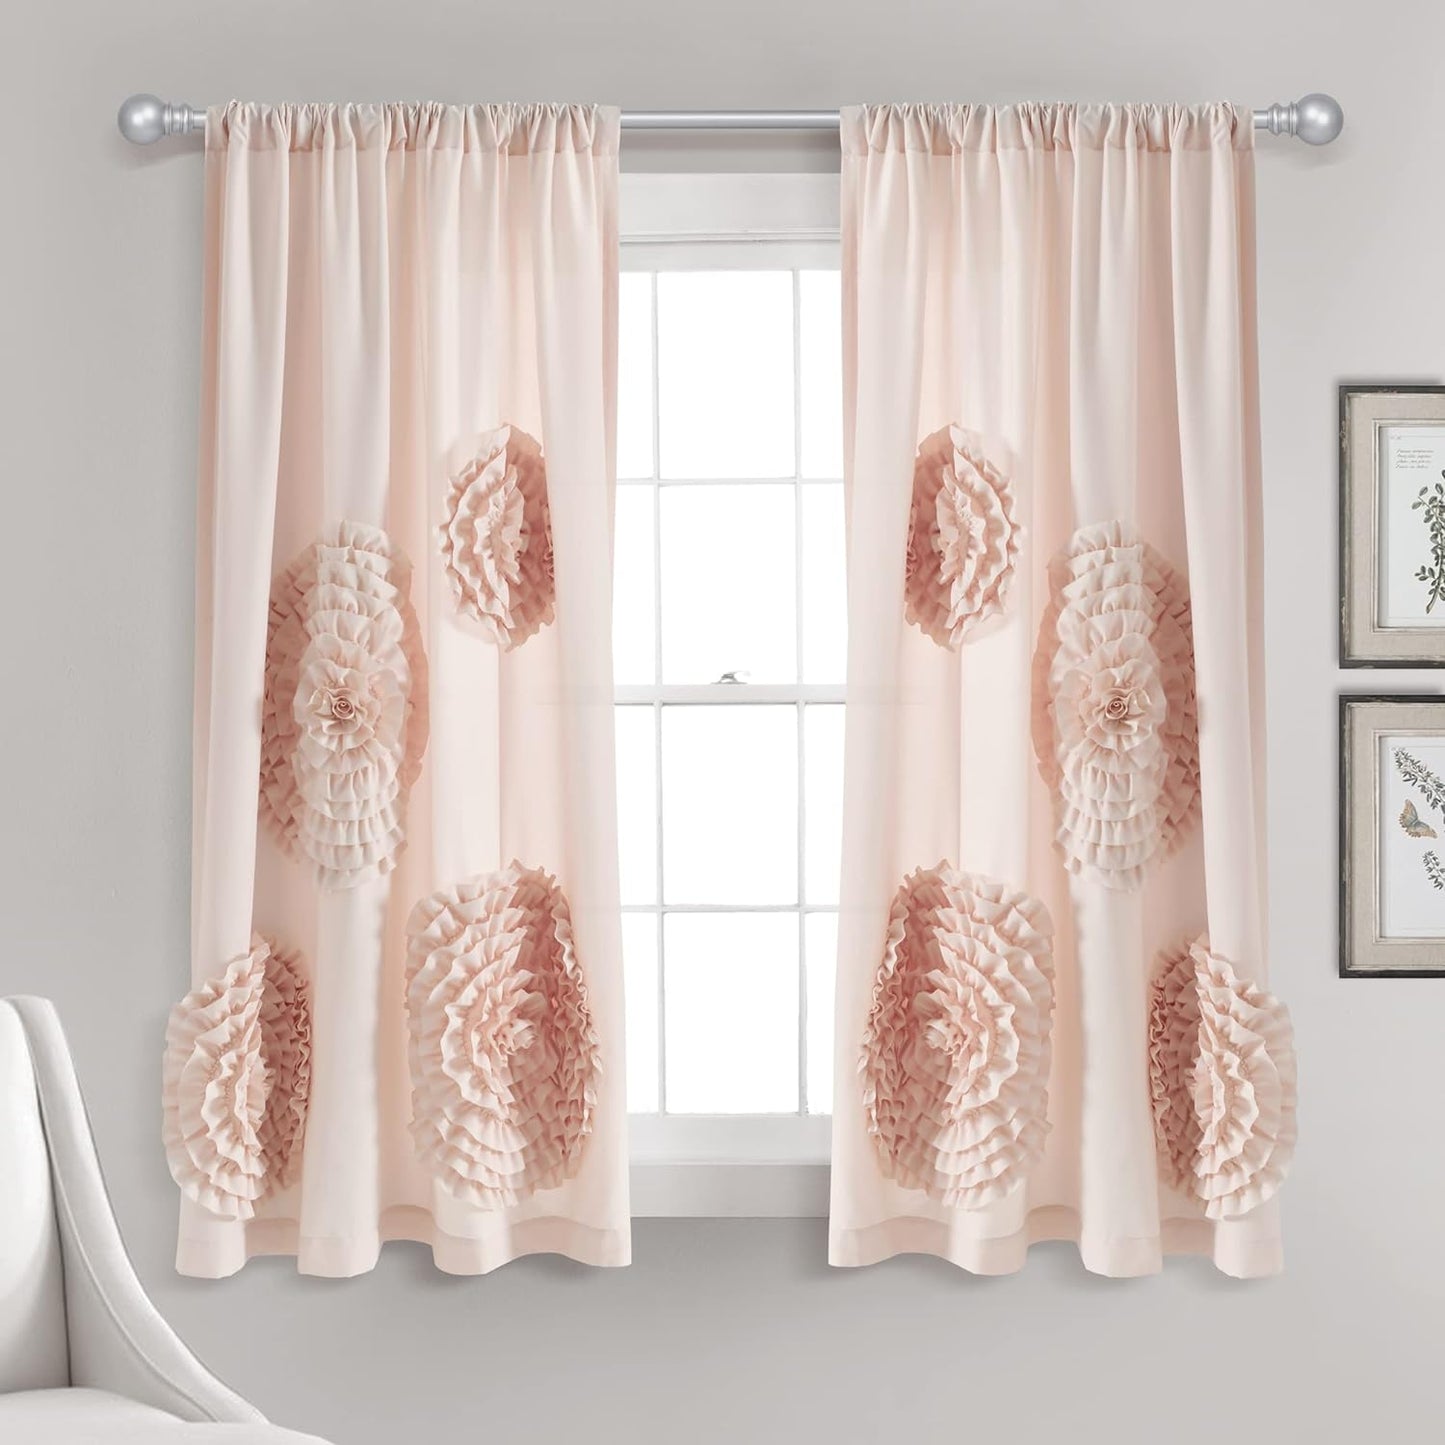 Lush Decor Serena Window Curtain Panel, Single Panel, 54" W X 84" L, Blush - Ruched Ruffled Flower Design - Ruffle Curtains for Bedroom, Living & Dining Room - Vintage Glam & Farmhouse Home Decor  Triangle Home Fashions Blush 54"W X 63"L 